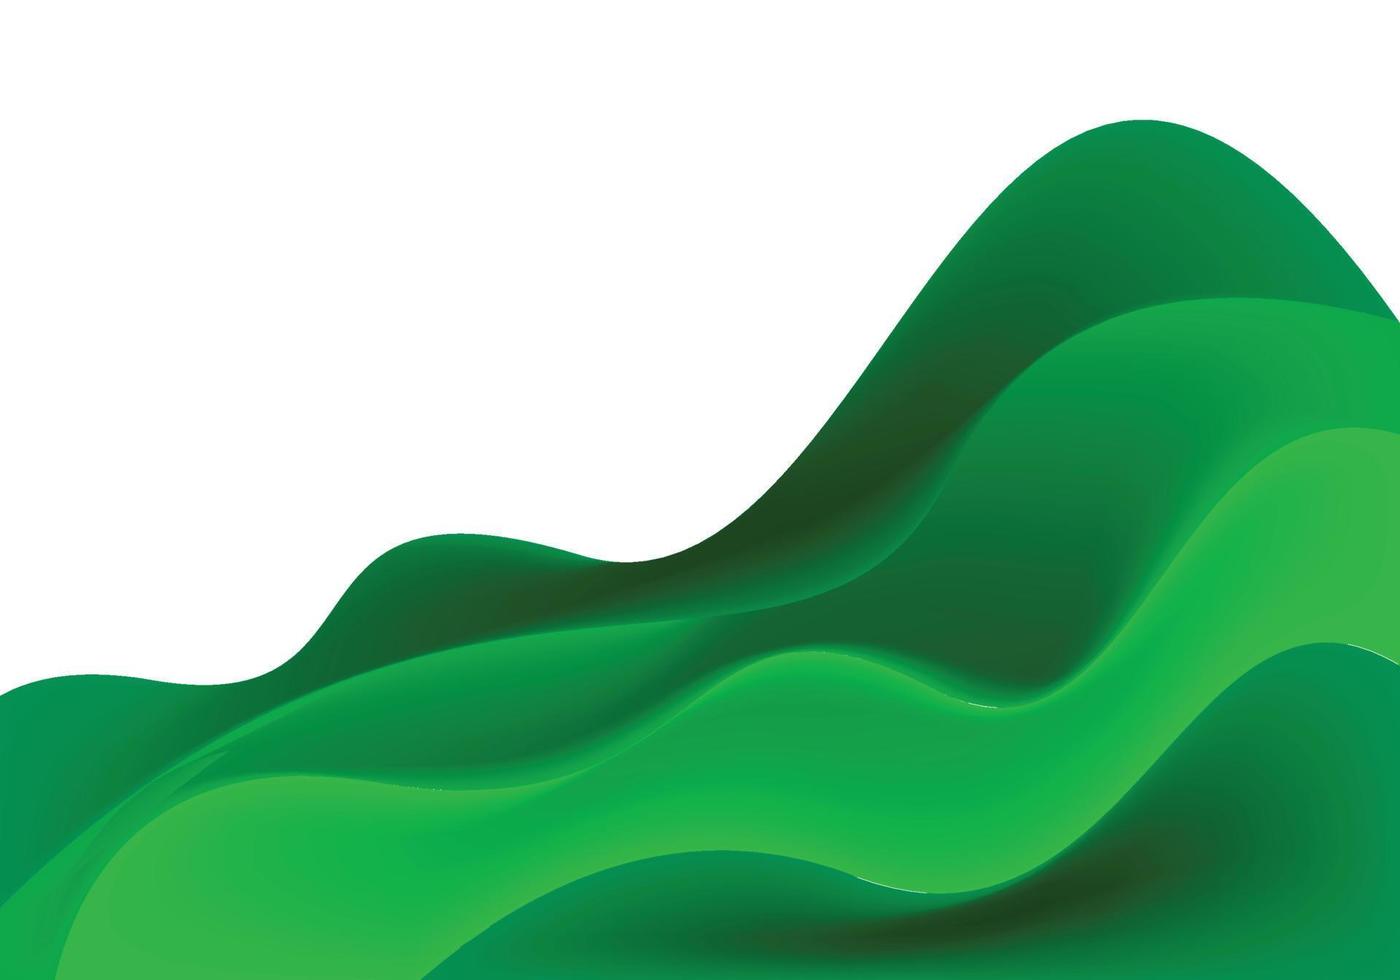 Abstract flowing green business wave background vector